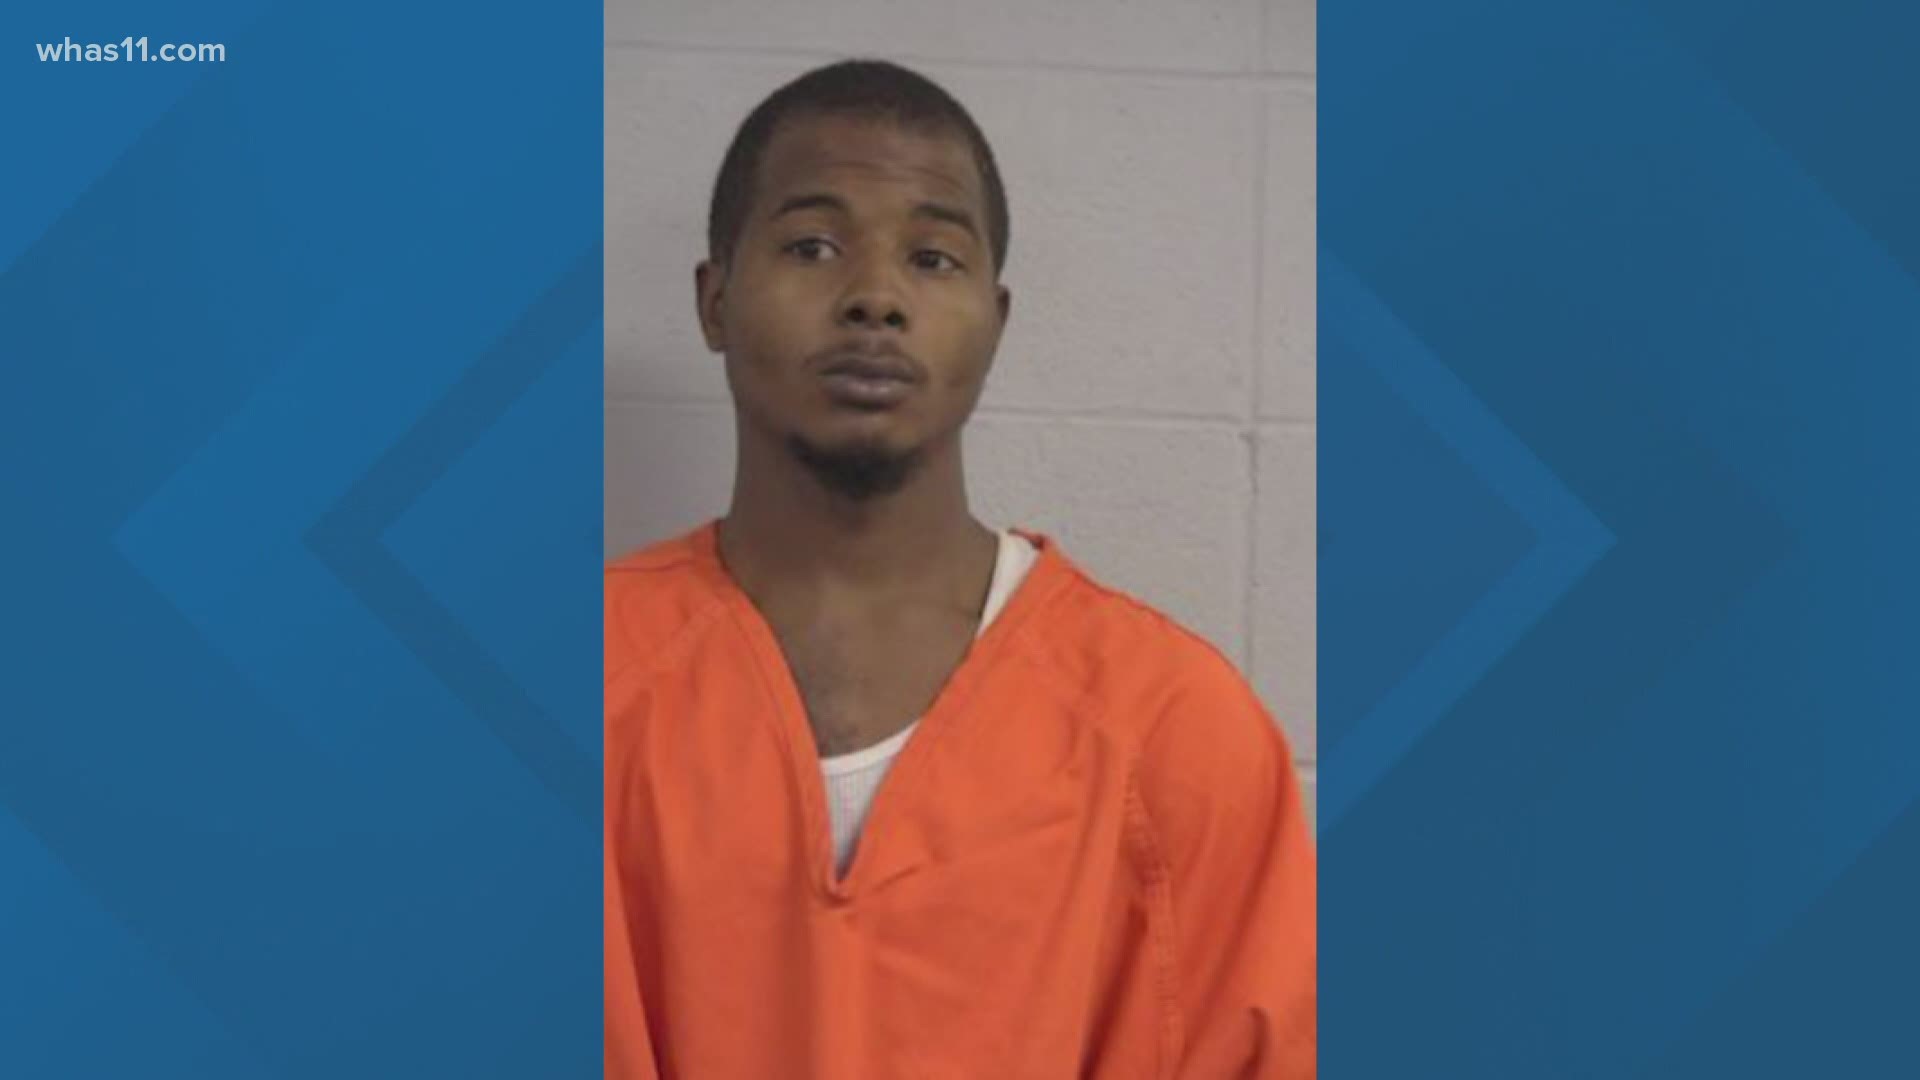 The grand jury indicted Larynzo Johnson on 35 counts, including assault and wanton endangerment in the September shooting following the Breonna Taylor case decision.